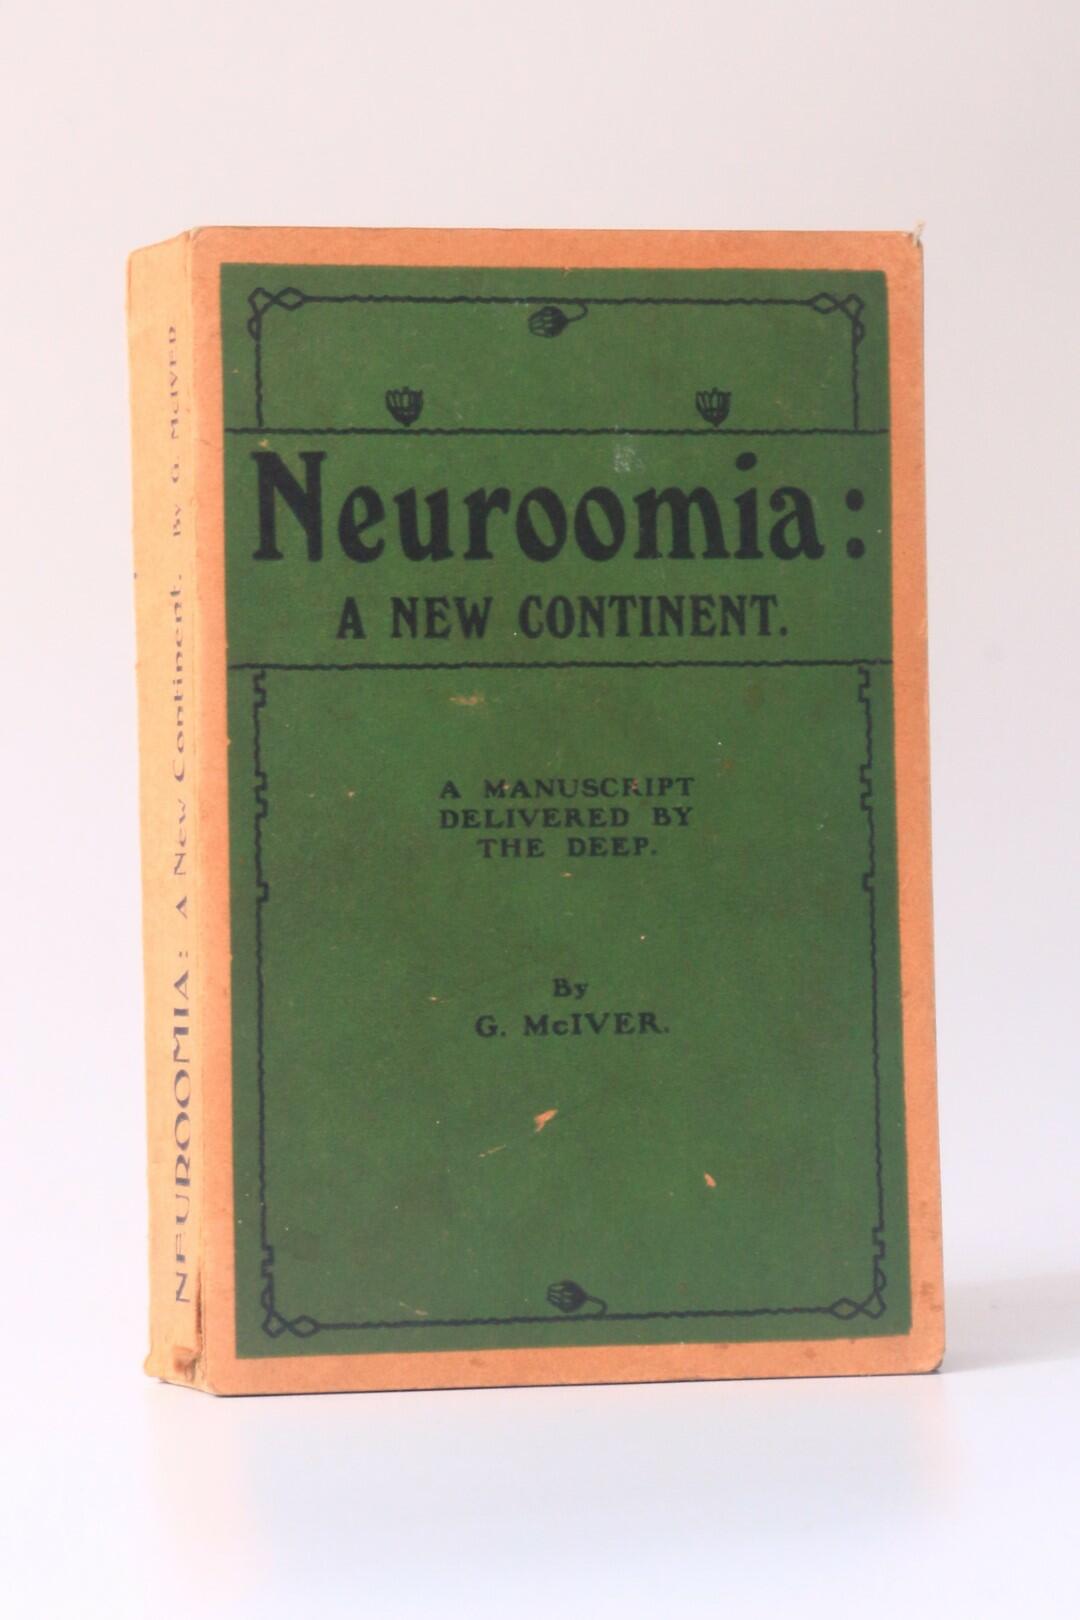 G. McIver - Neuroomia: A New Continent; A Manuscript Delivered by the Deep - George Robertson & Company, 1894, First Edition.